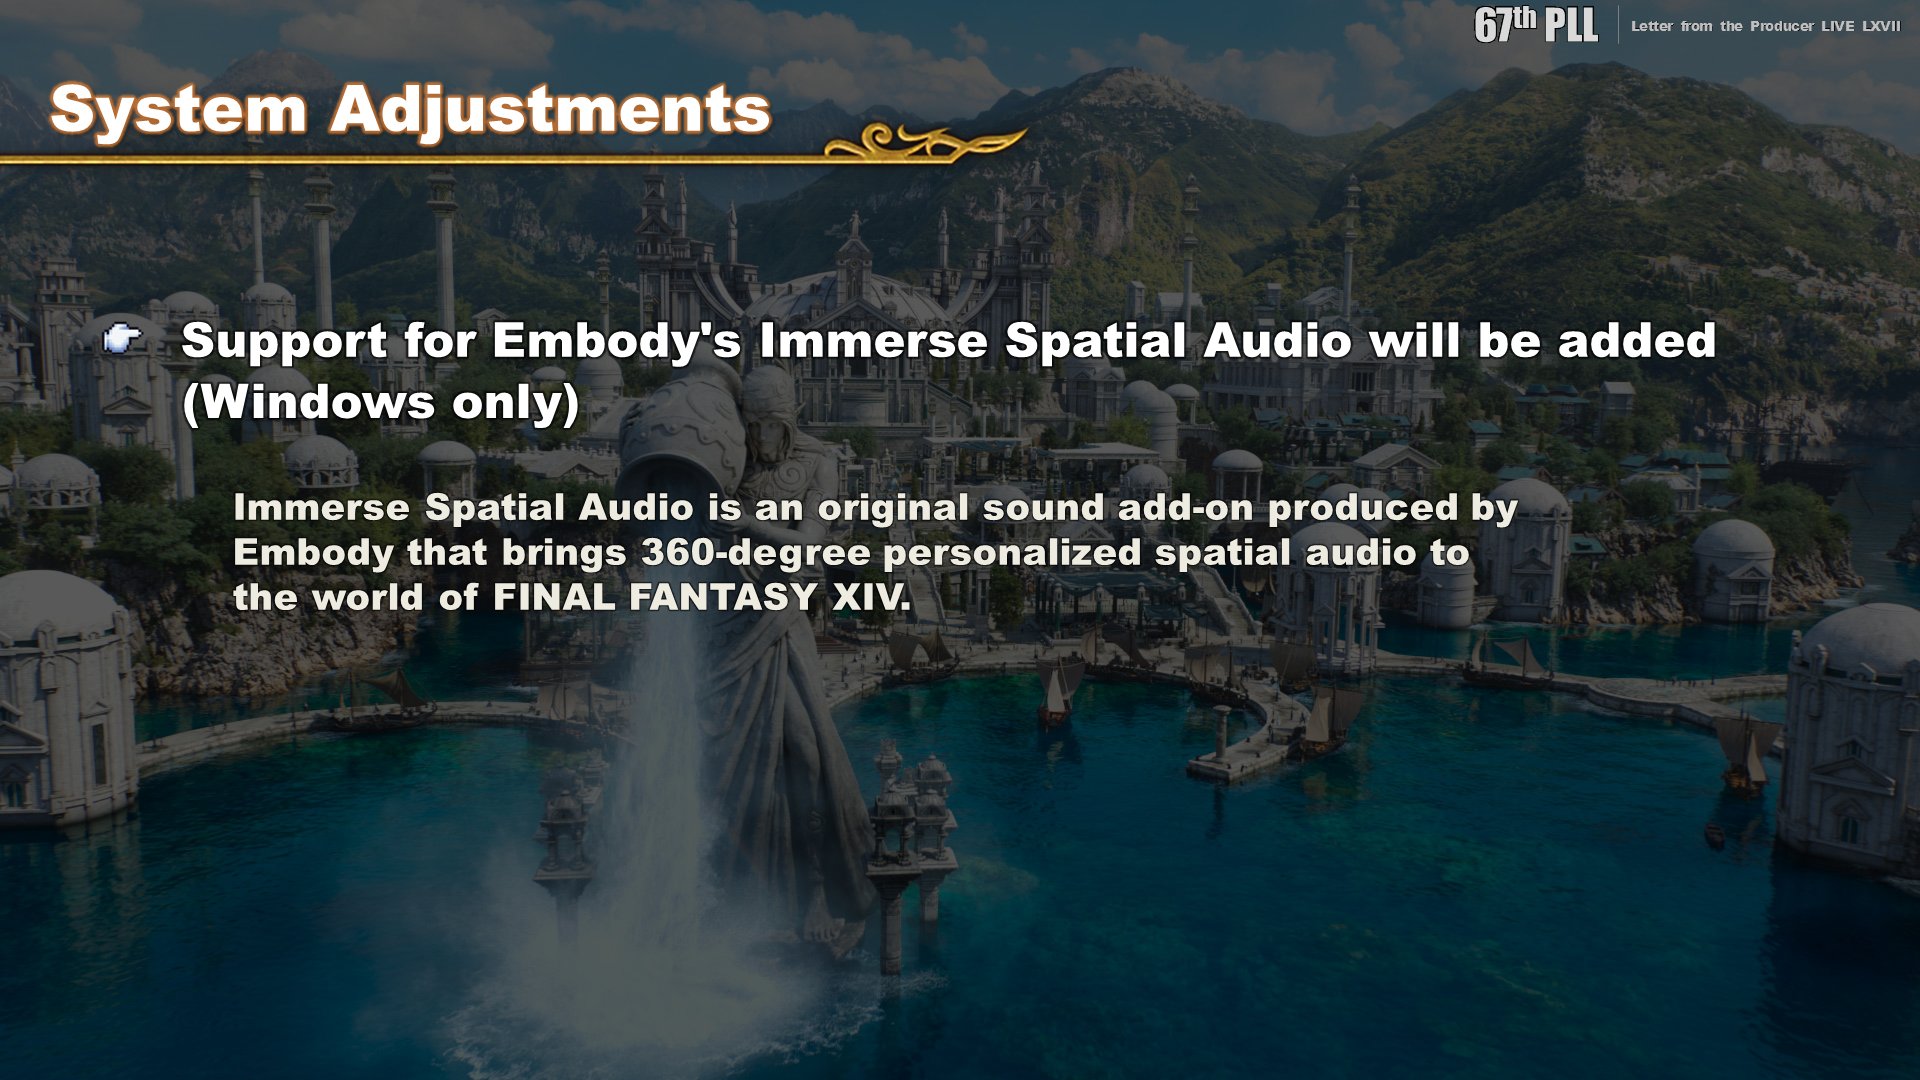 Final Fantasy Xiv Immerse Gamepack Final Fantasy Xiv Edition This Premium Service Sound Add On Allows Windows Users To Enjoy 360 Degree Personalized Spatial Audio In Ffxiv T Co 5xwizjtmfr T Co V4ftsyevtu Twitter